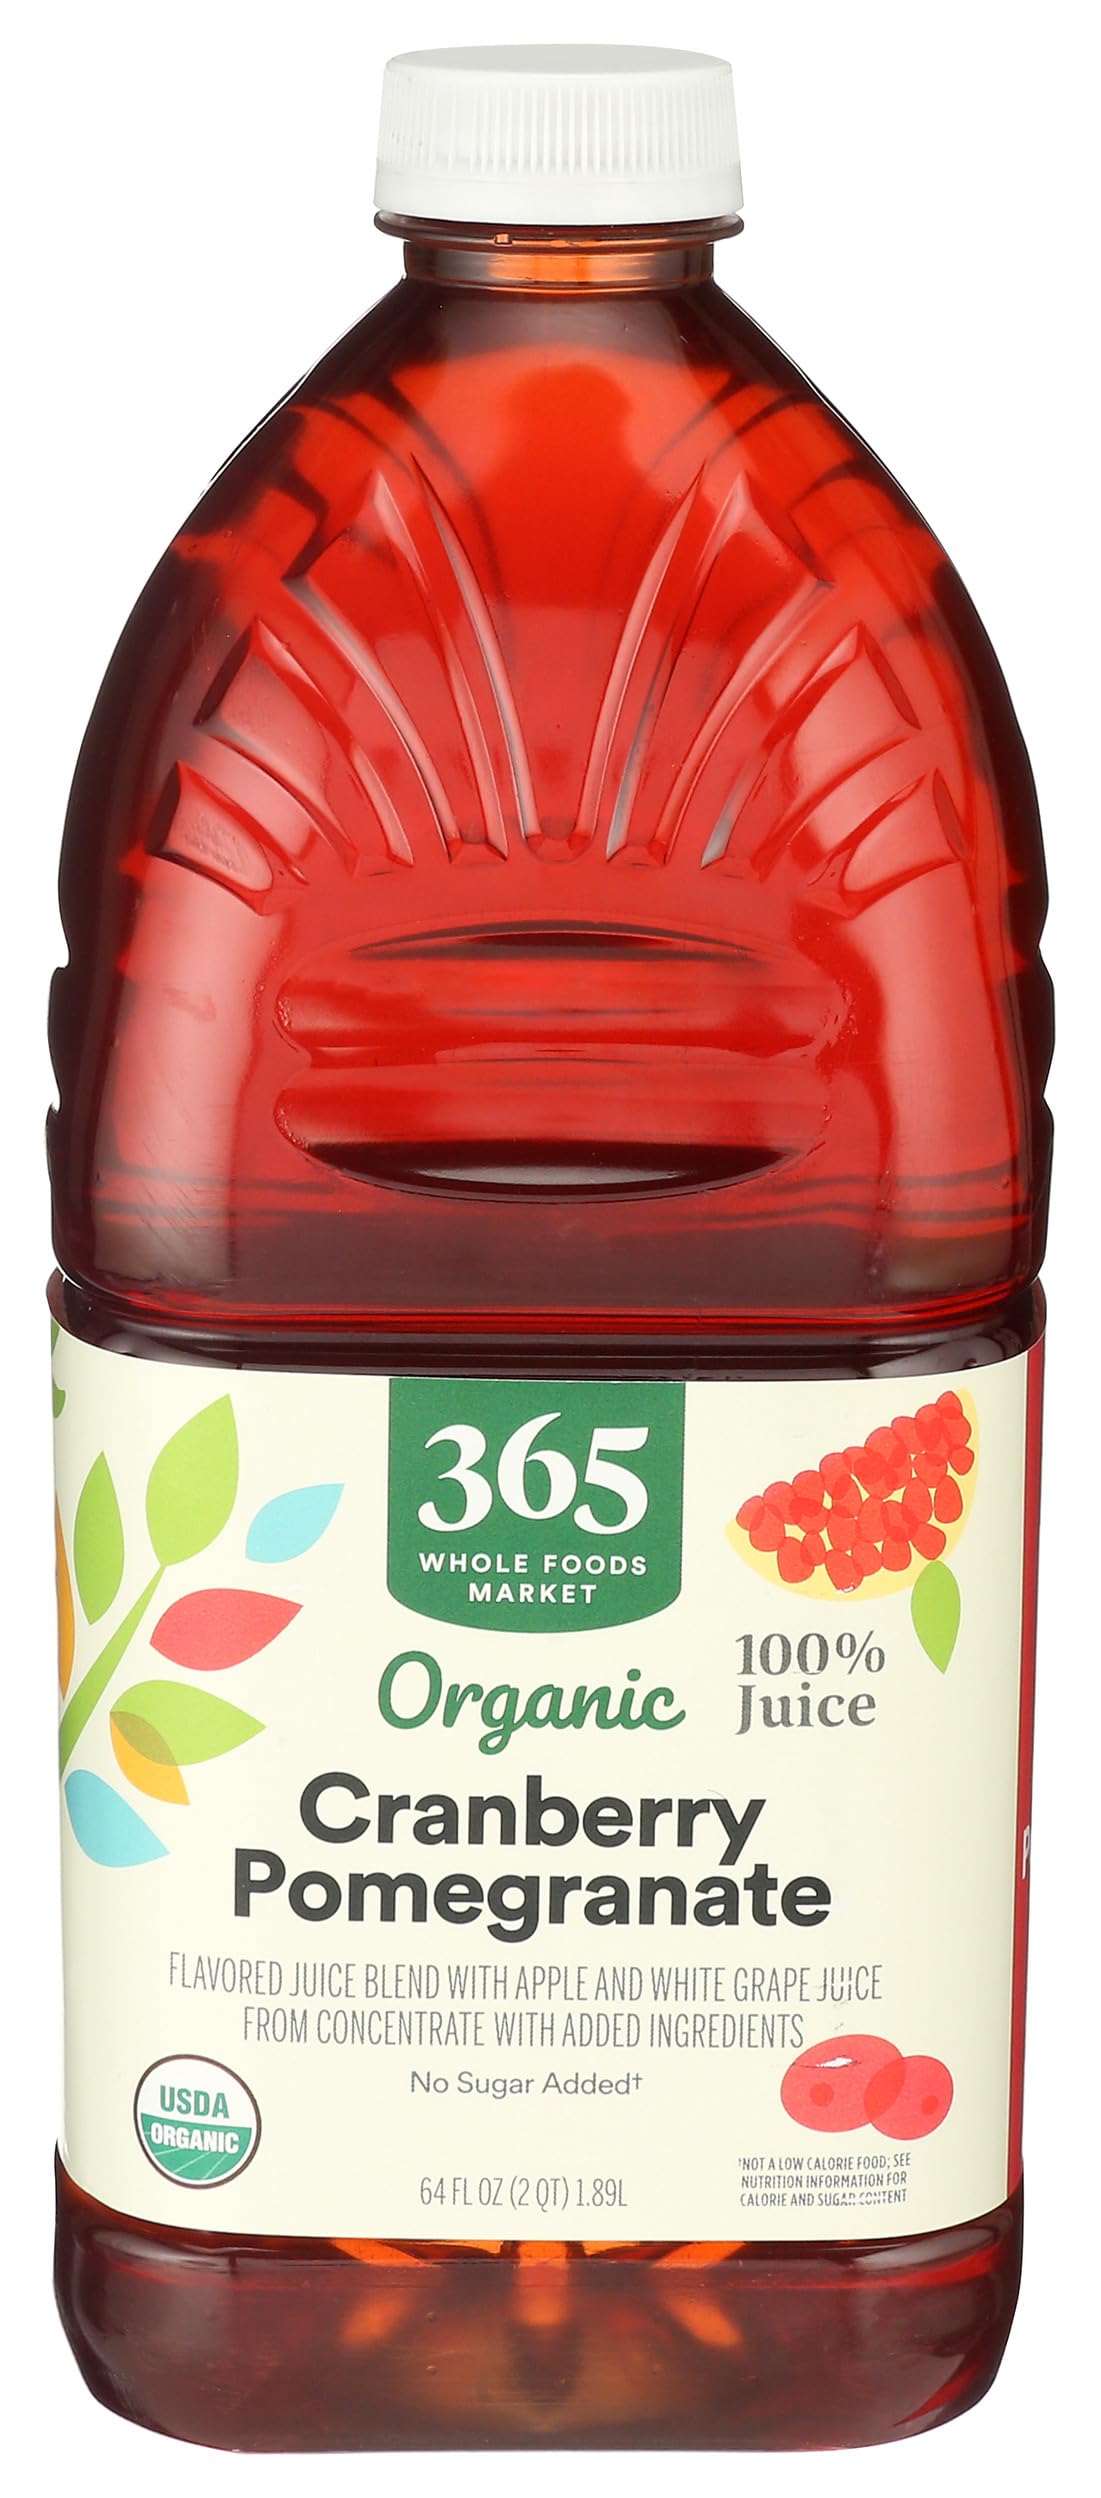 64-Oz 365 by Whole Foods Market Organic Cranberry Pomegranate Juice $2.87 w/ S&S + Free Shipping w/ Prime or on orders over $35